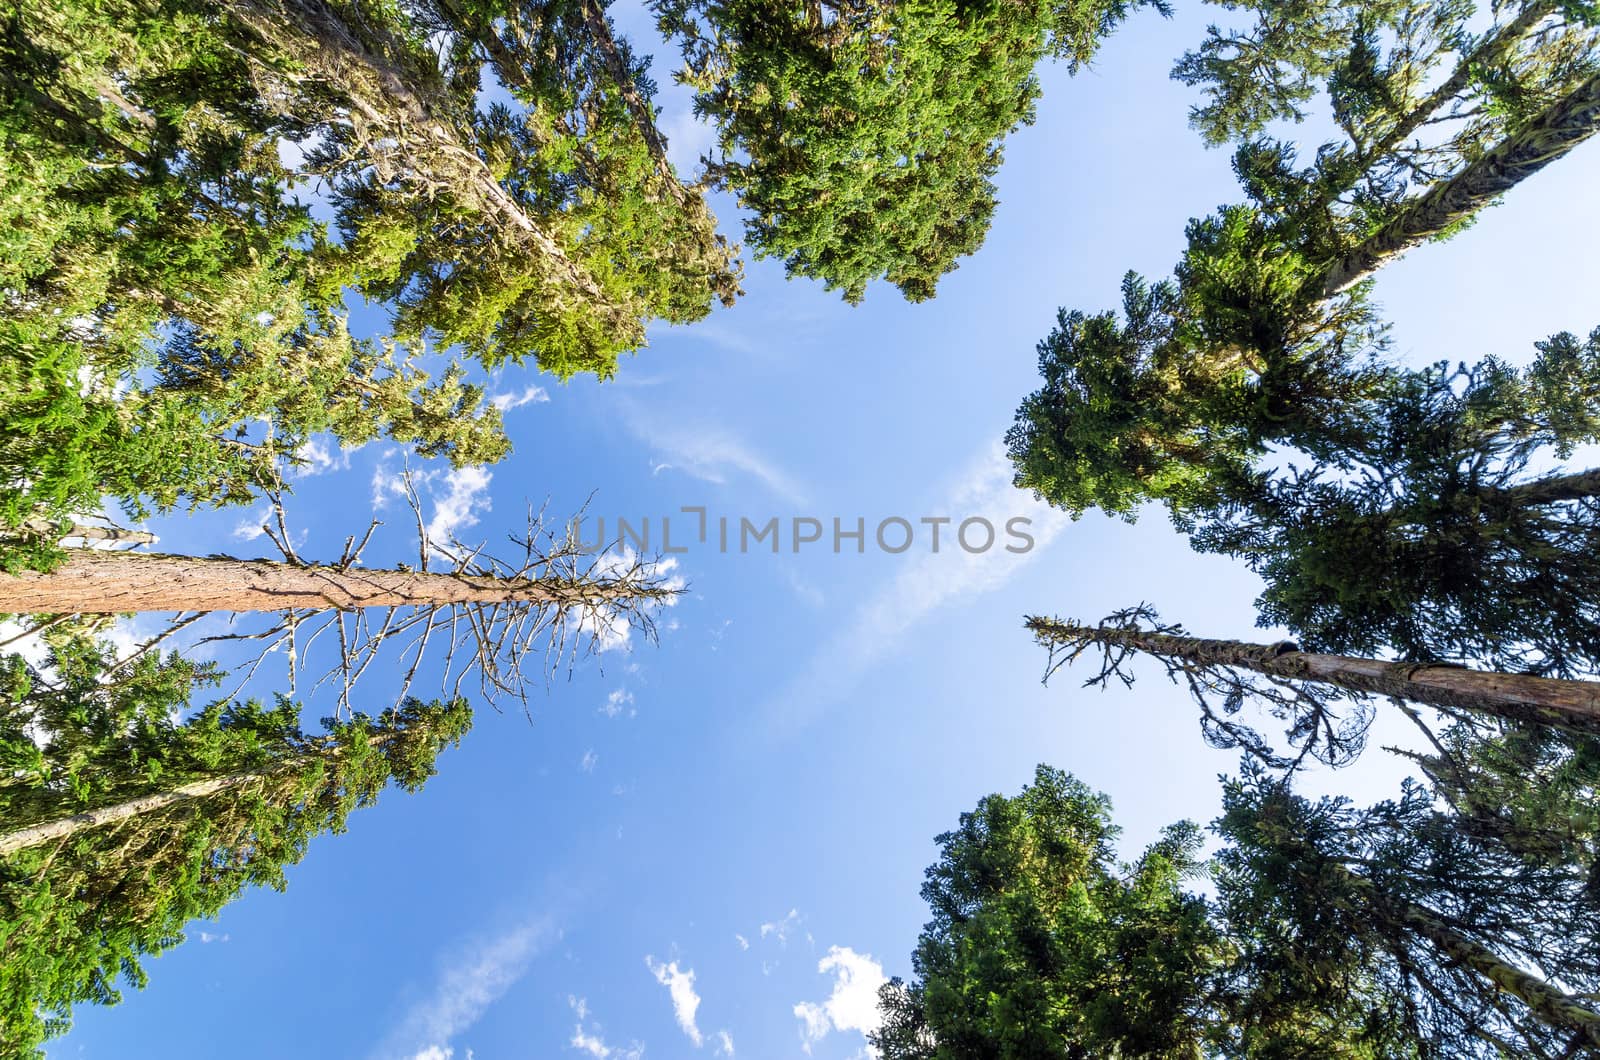 Looking up at towering pine trees